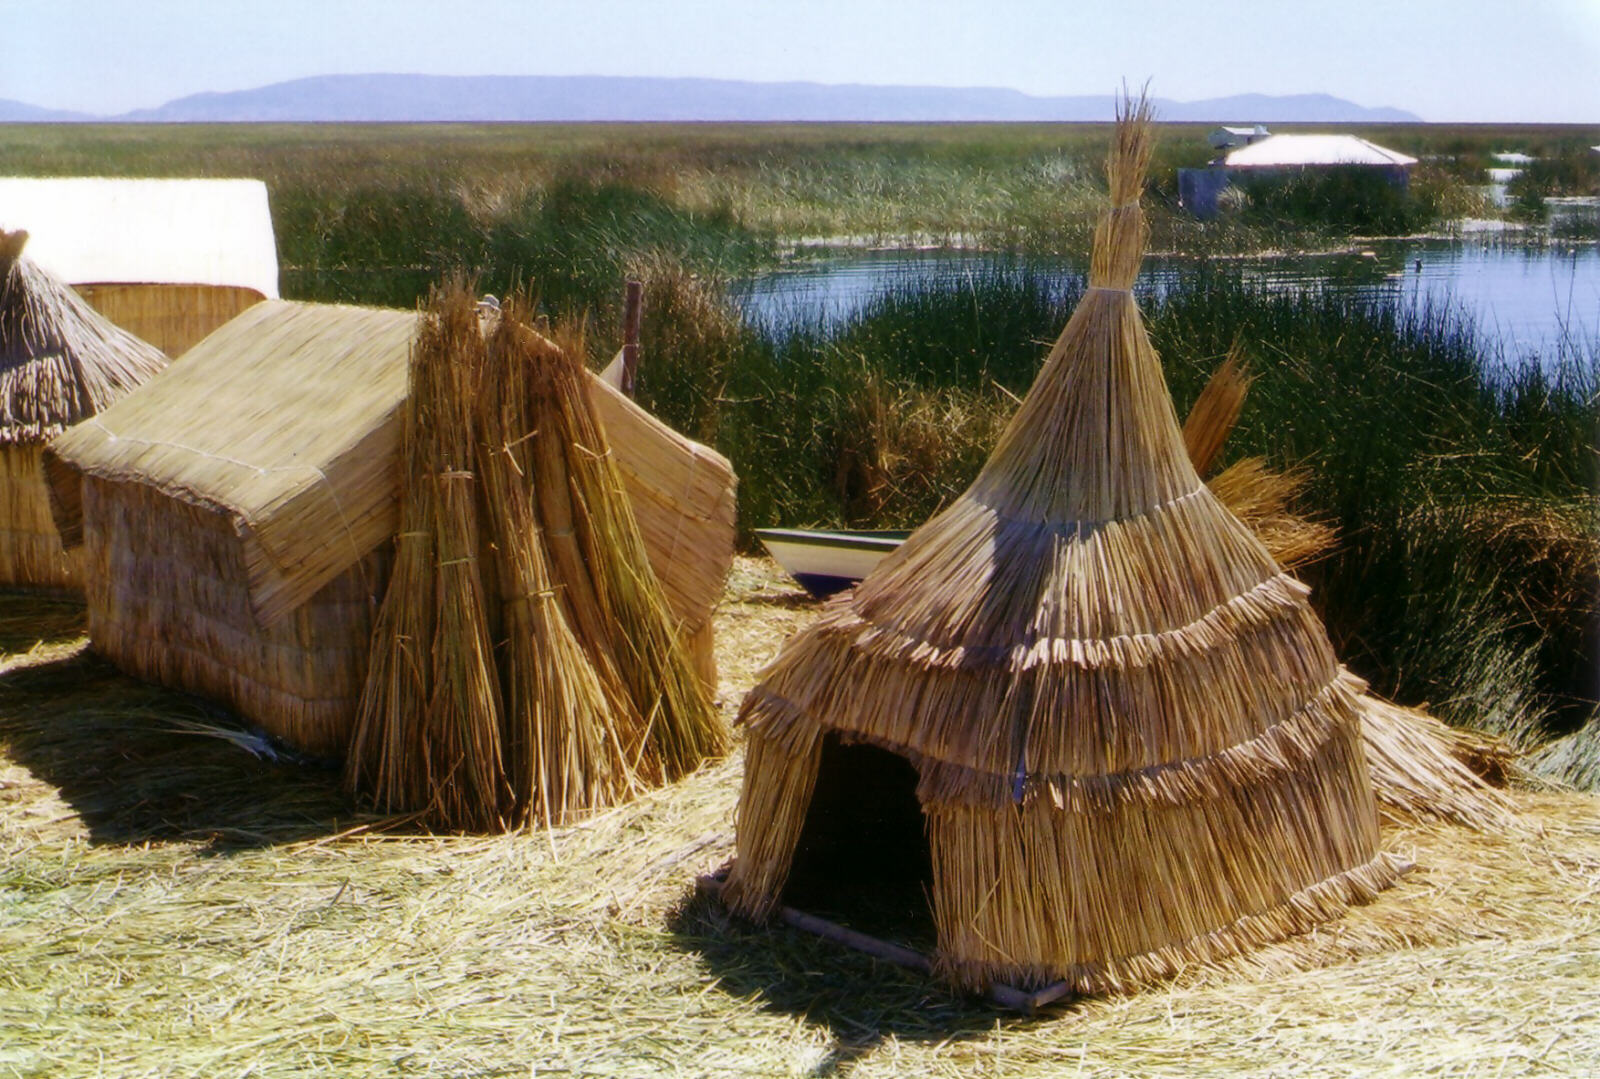 The Uros people's floating reed village on Lake Titicaca